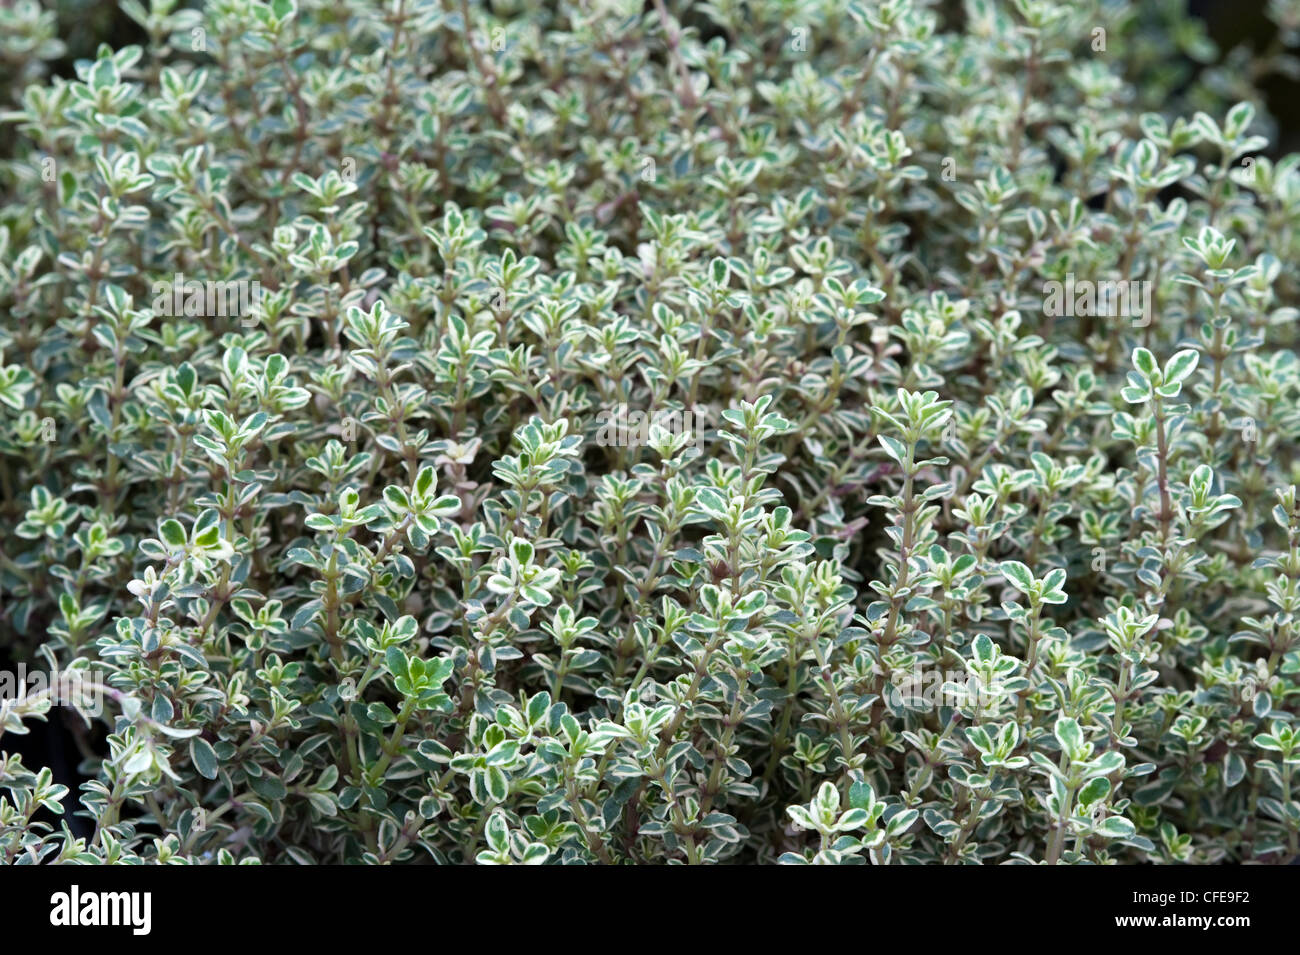 thyme thymus silver queen Stock Photo